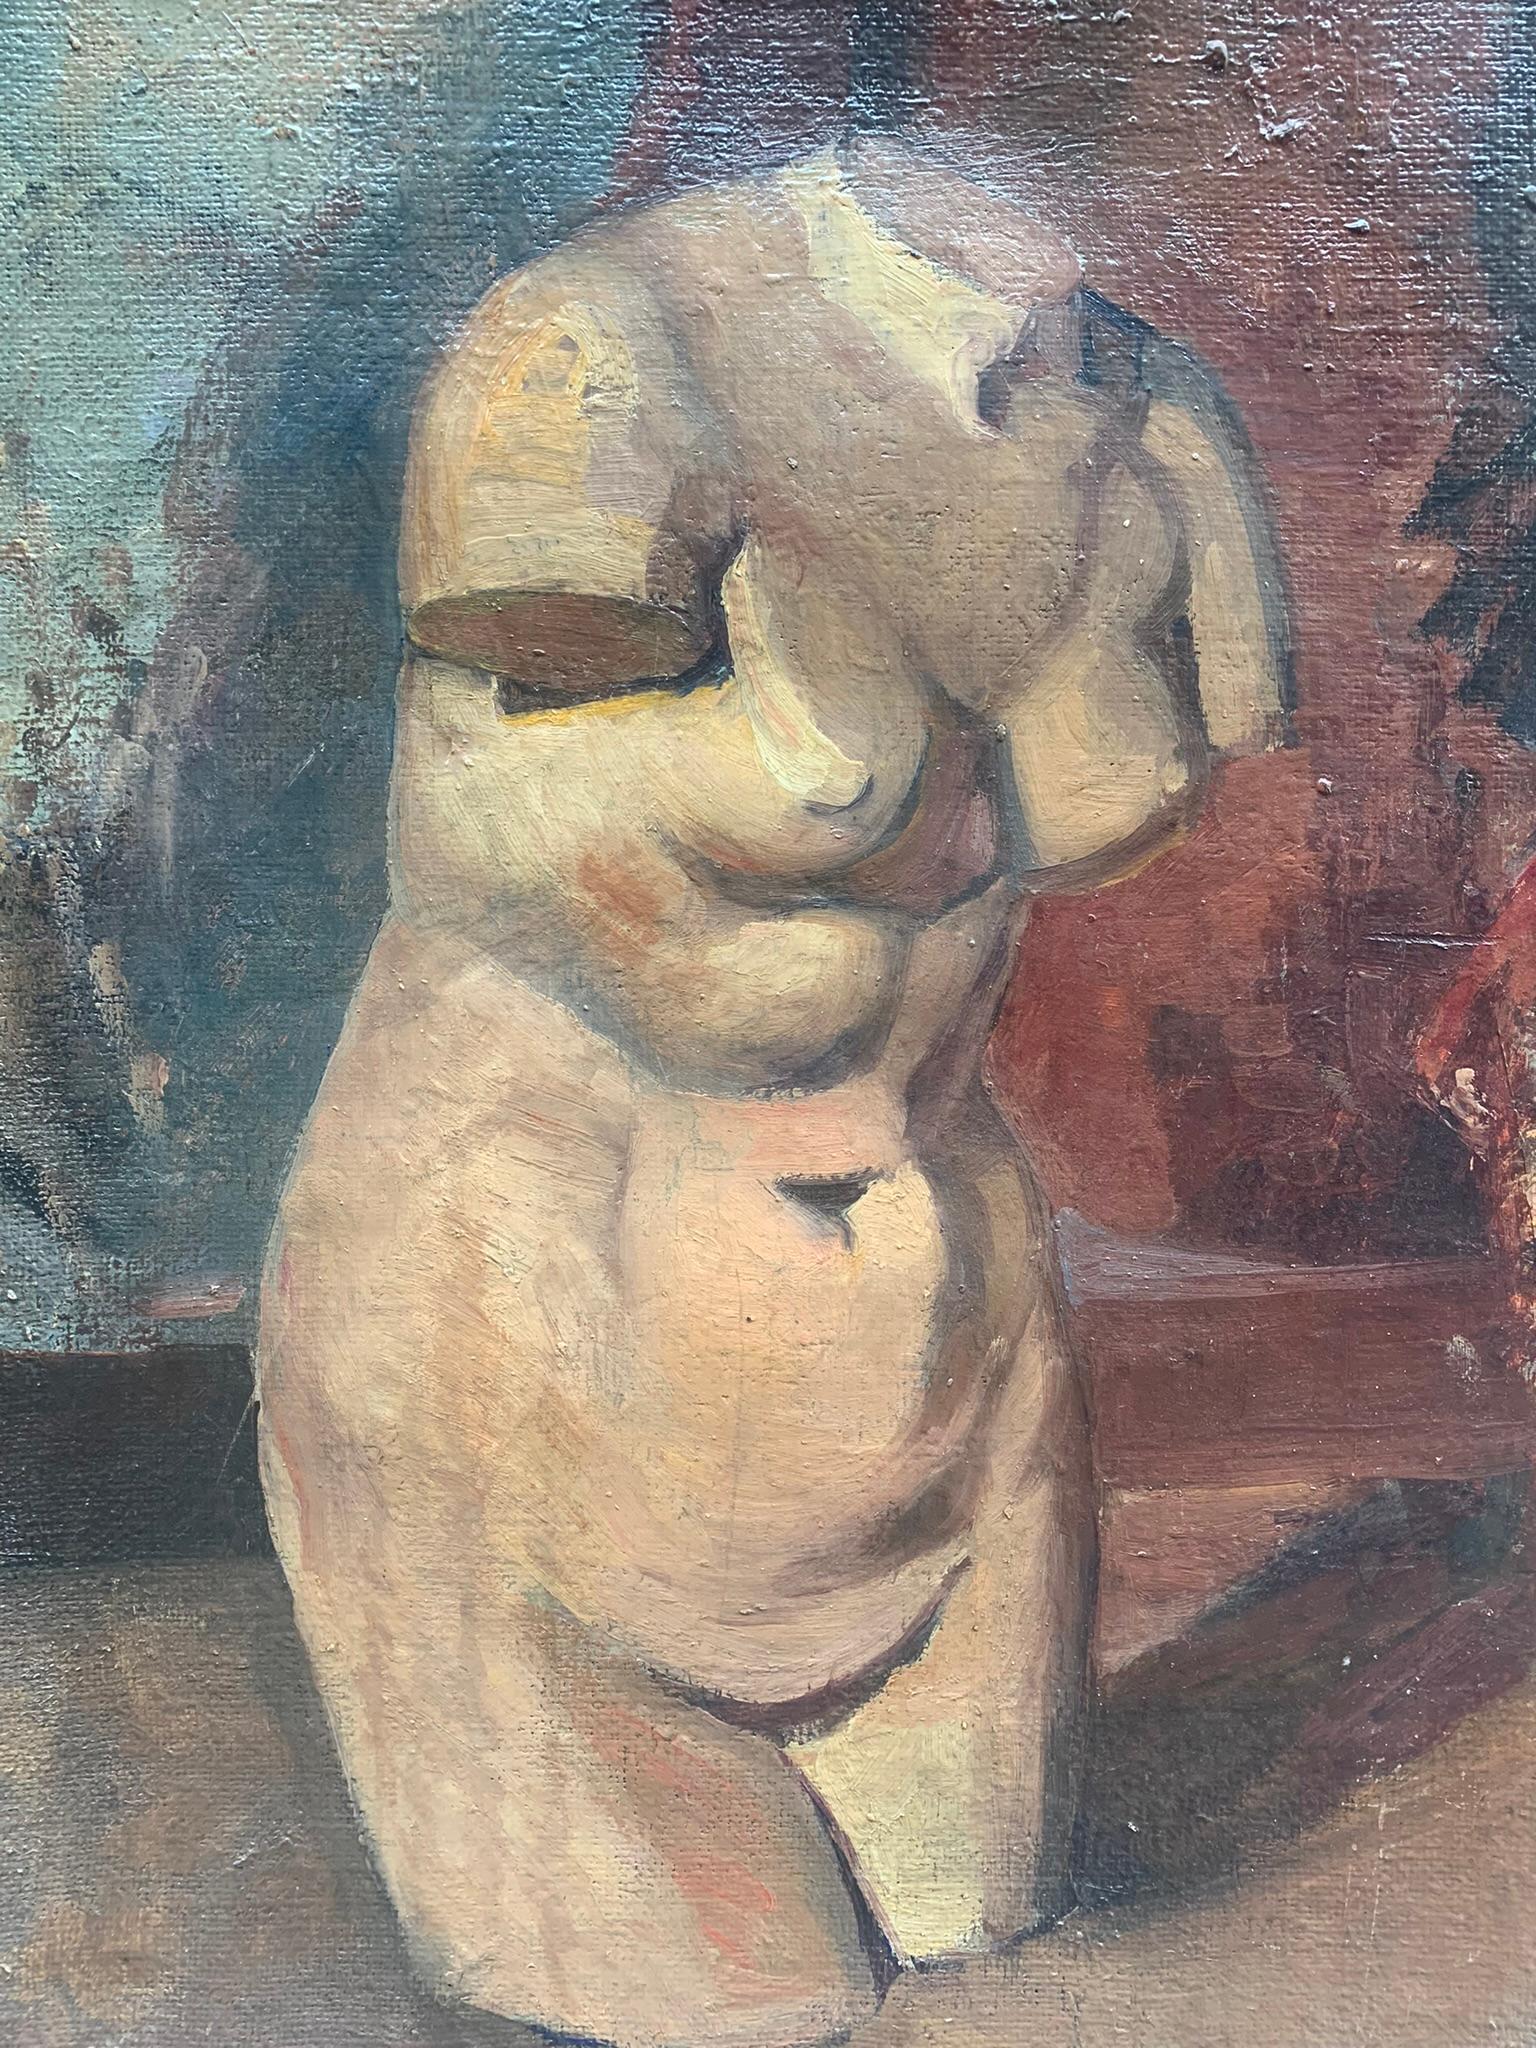 Female Torso And Portrait Of The 1920s. Double Sketch On Canvas. - Art Deco Painting by Unknown